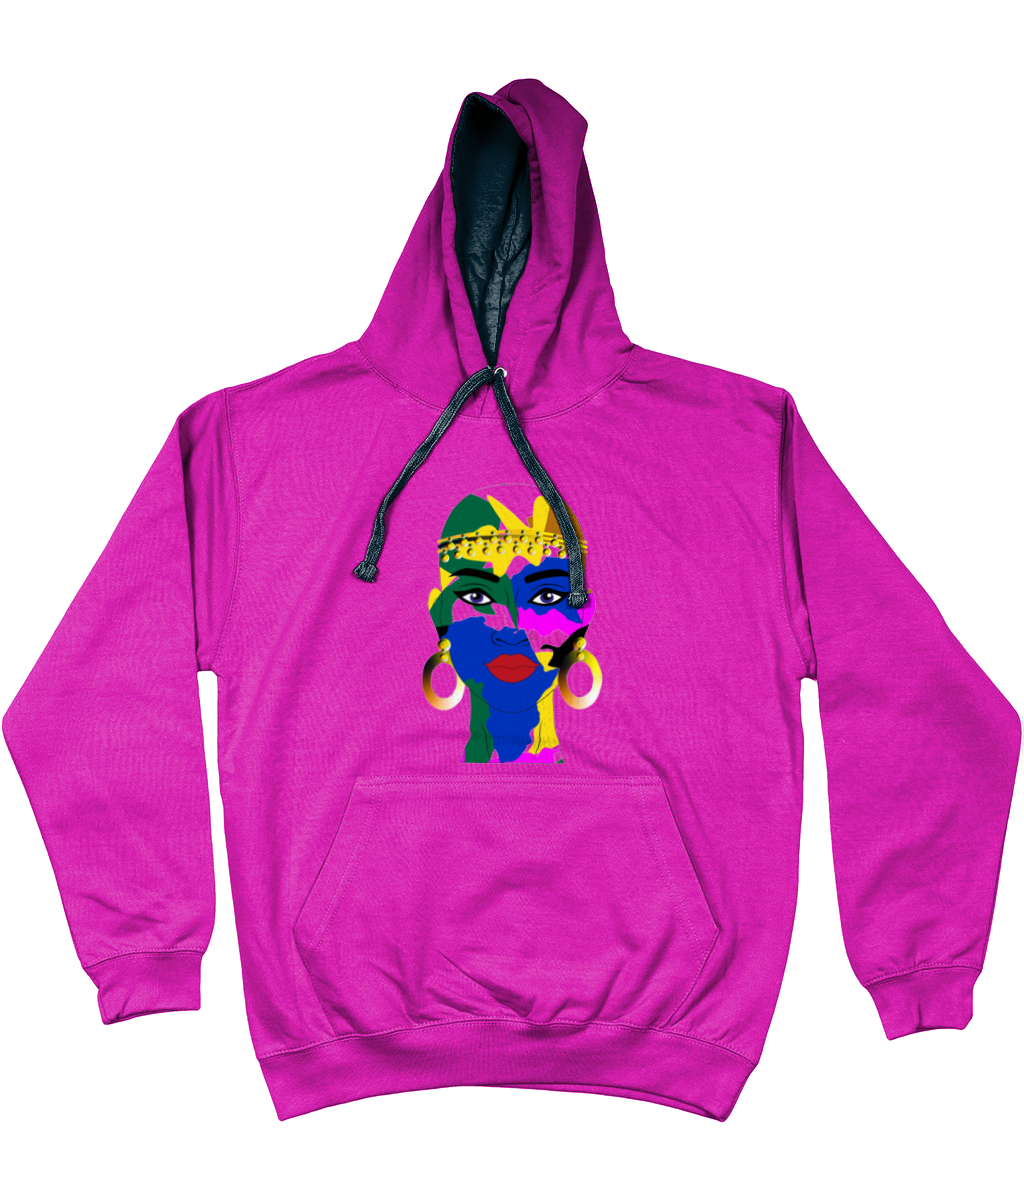 AfriBix Camo Warrior Unisex Hoodie with a contrast hood and string